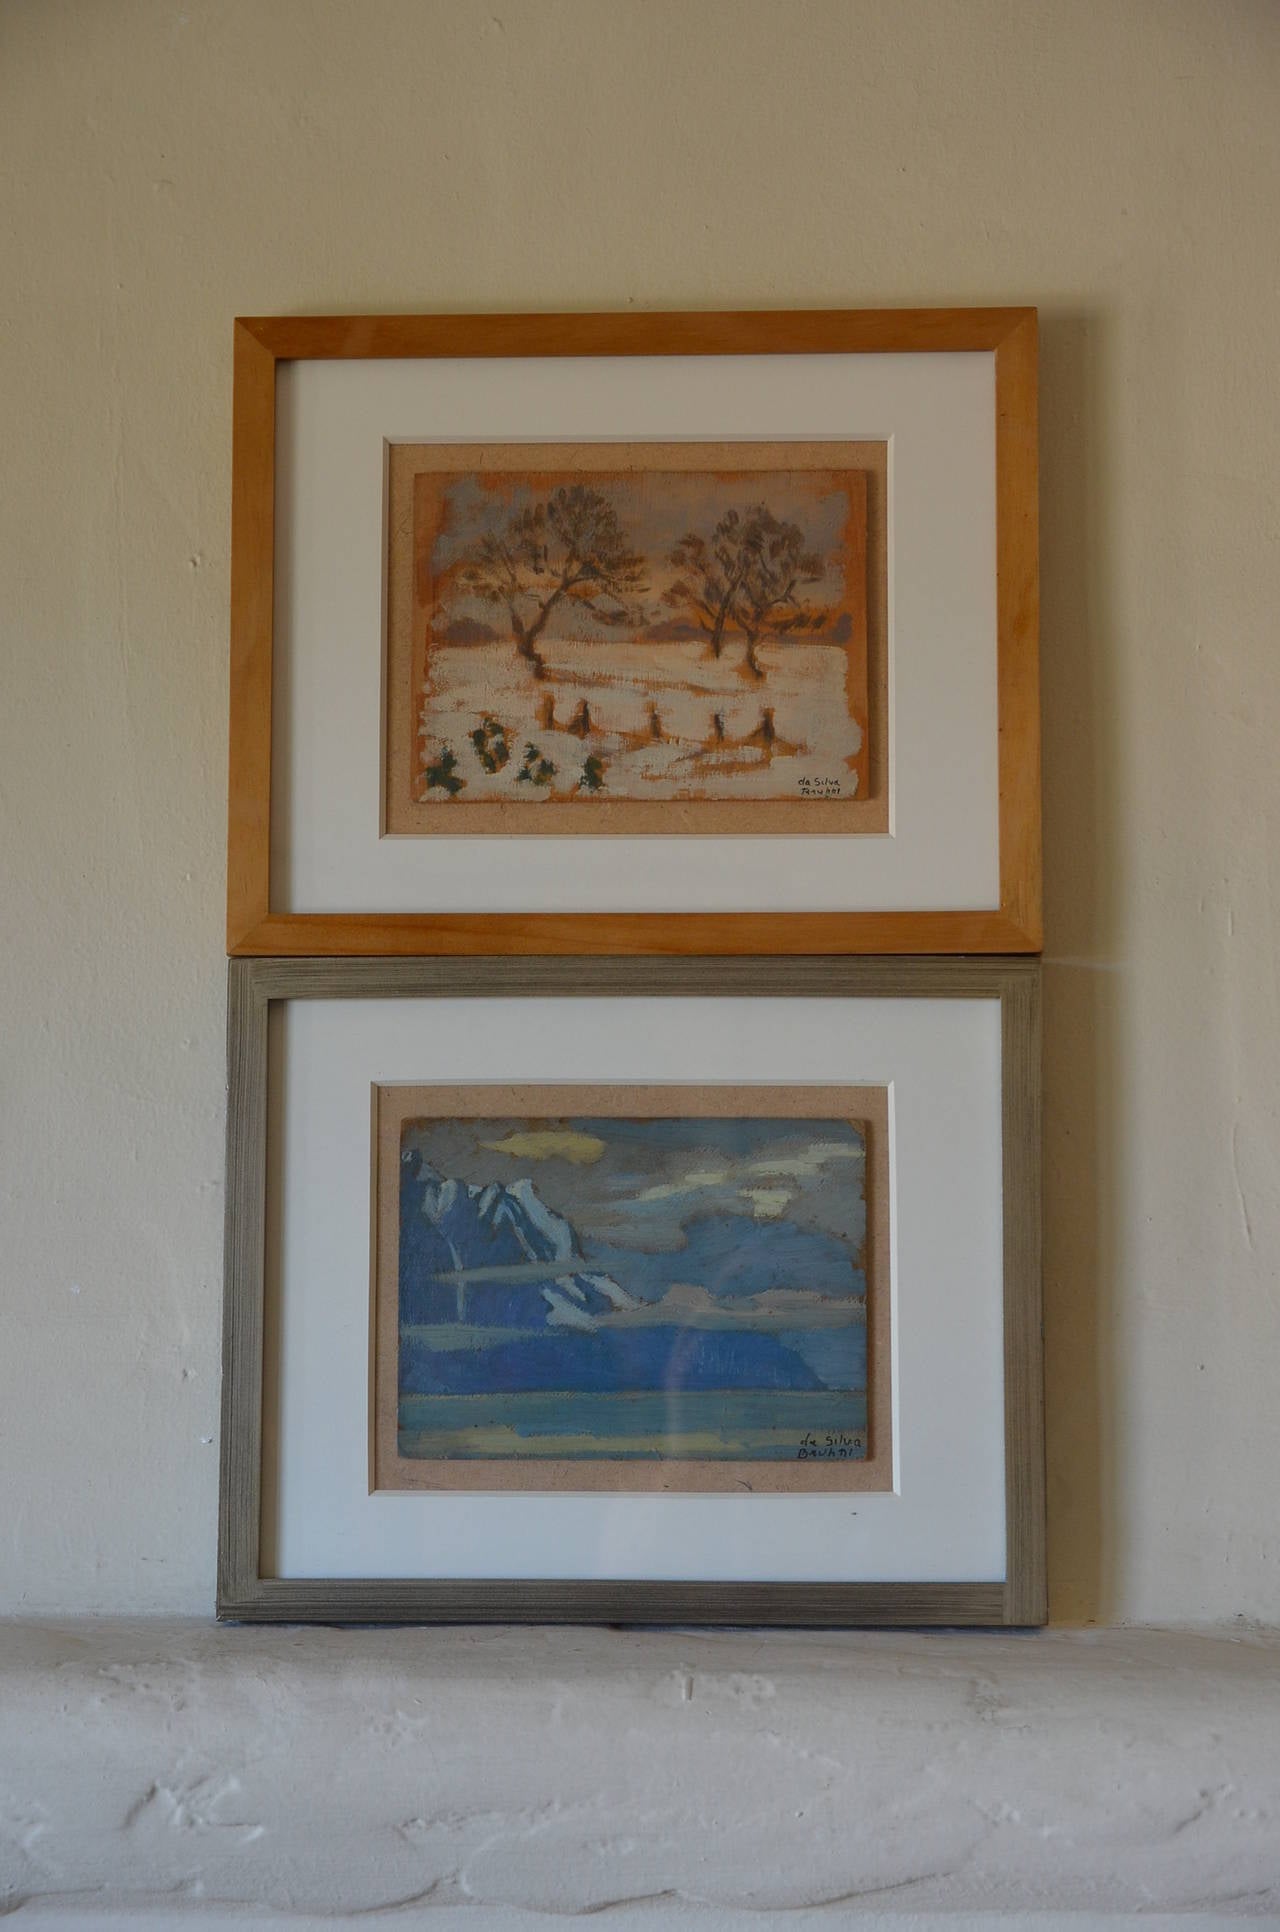 Rare set of two small framed oil paintings by Ivan da Silva Bruhns, (Paris, 1881-Antibes, 1980). Unique works. Signed. Each panel is 9 in. wide x 6.5 in. tall.